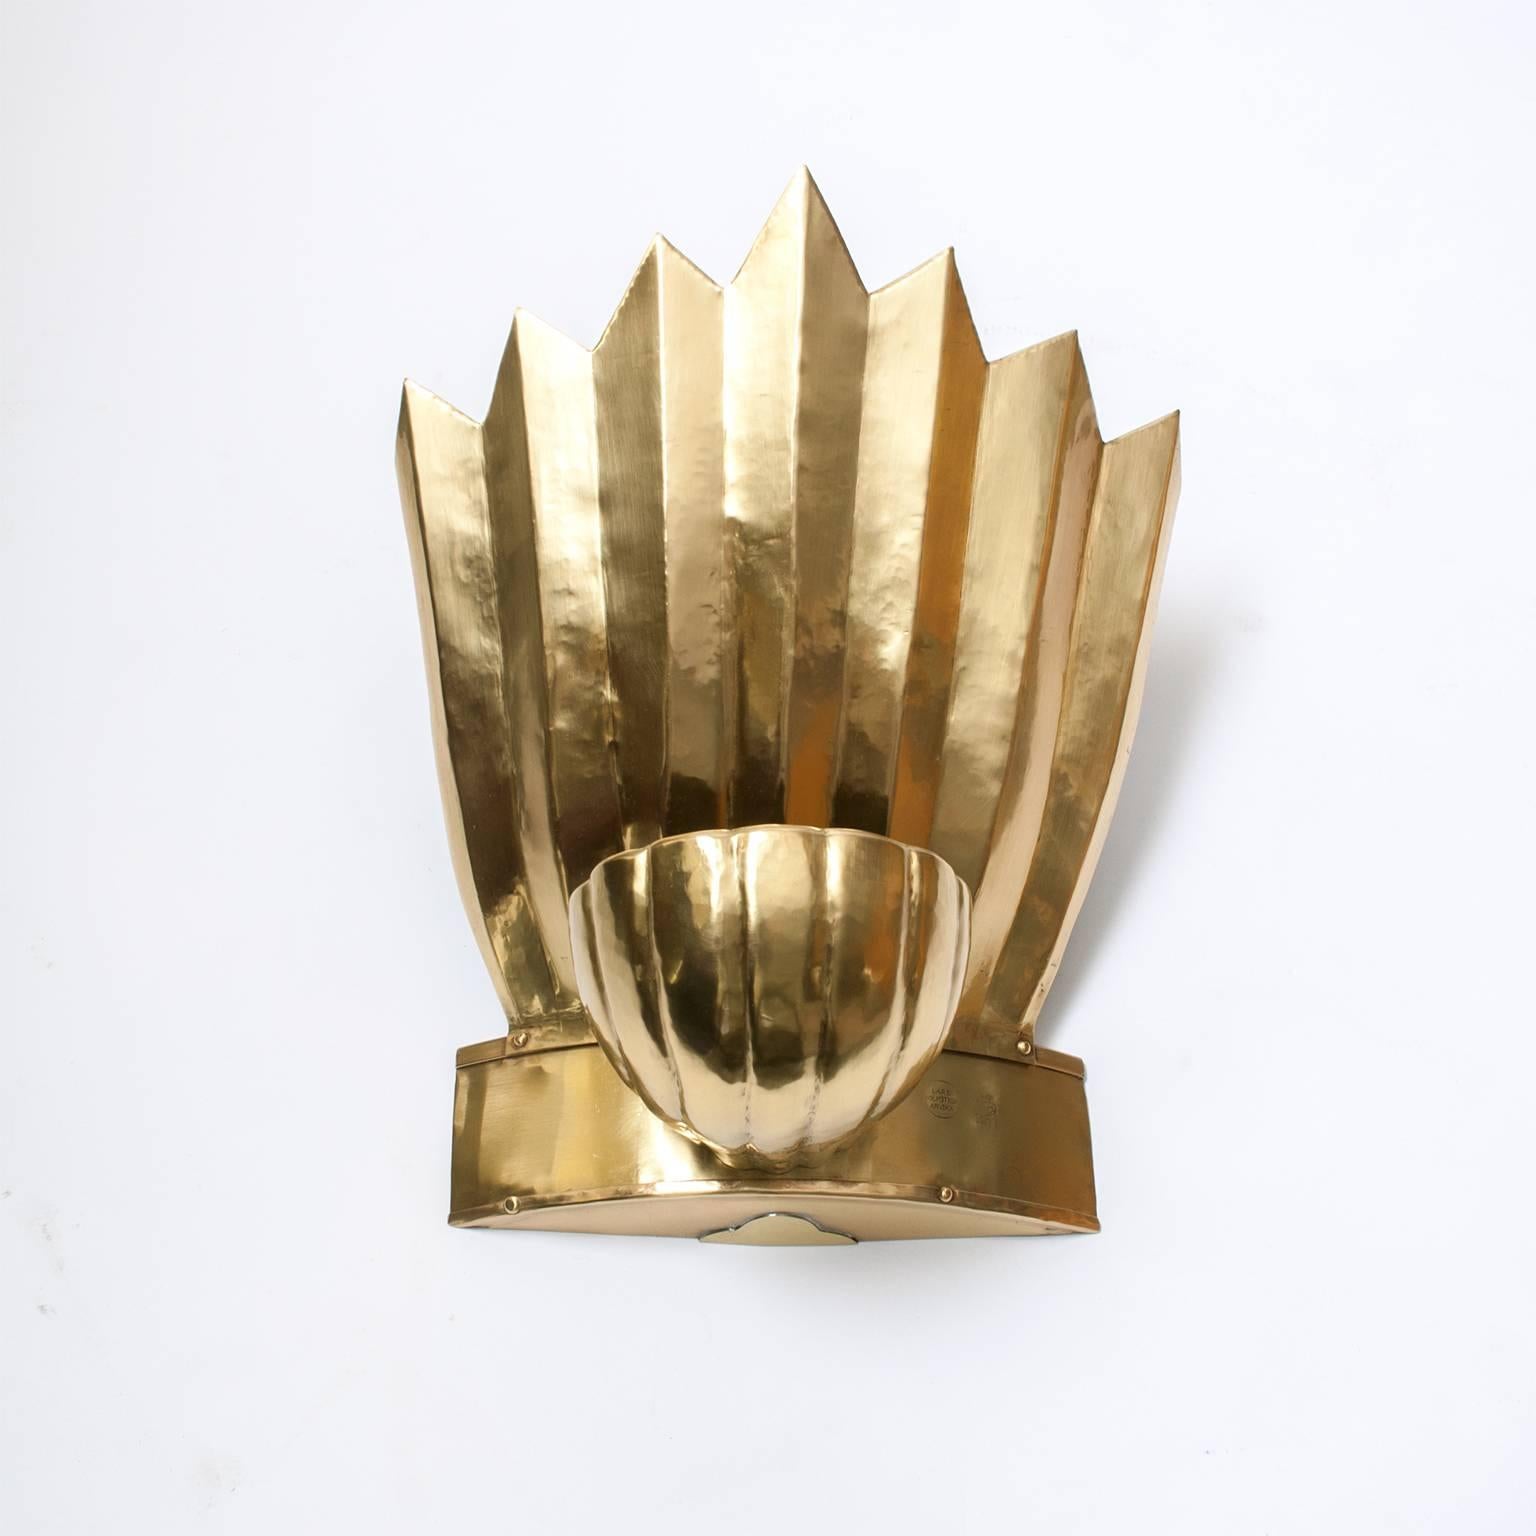 Polished Scandinavian Modern Brass Sconces Crown and Shell by Lars Holmstrom, Arvika